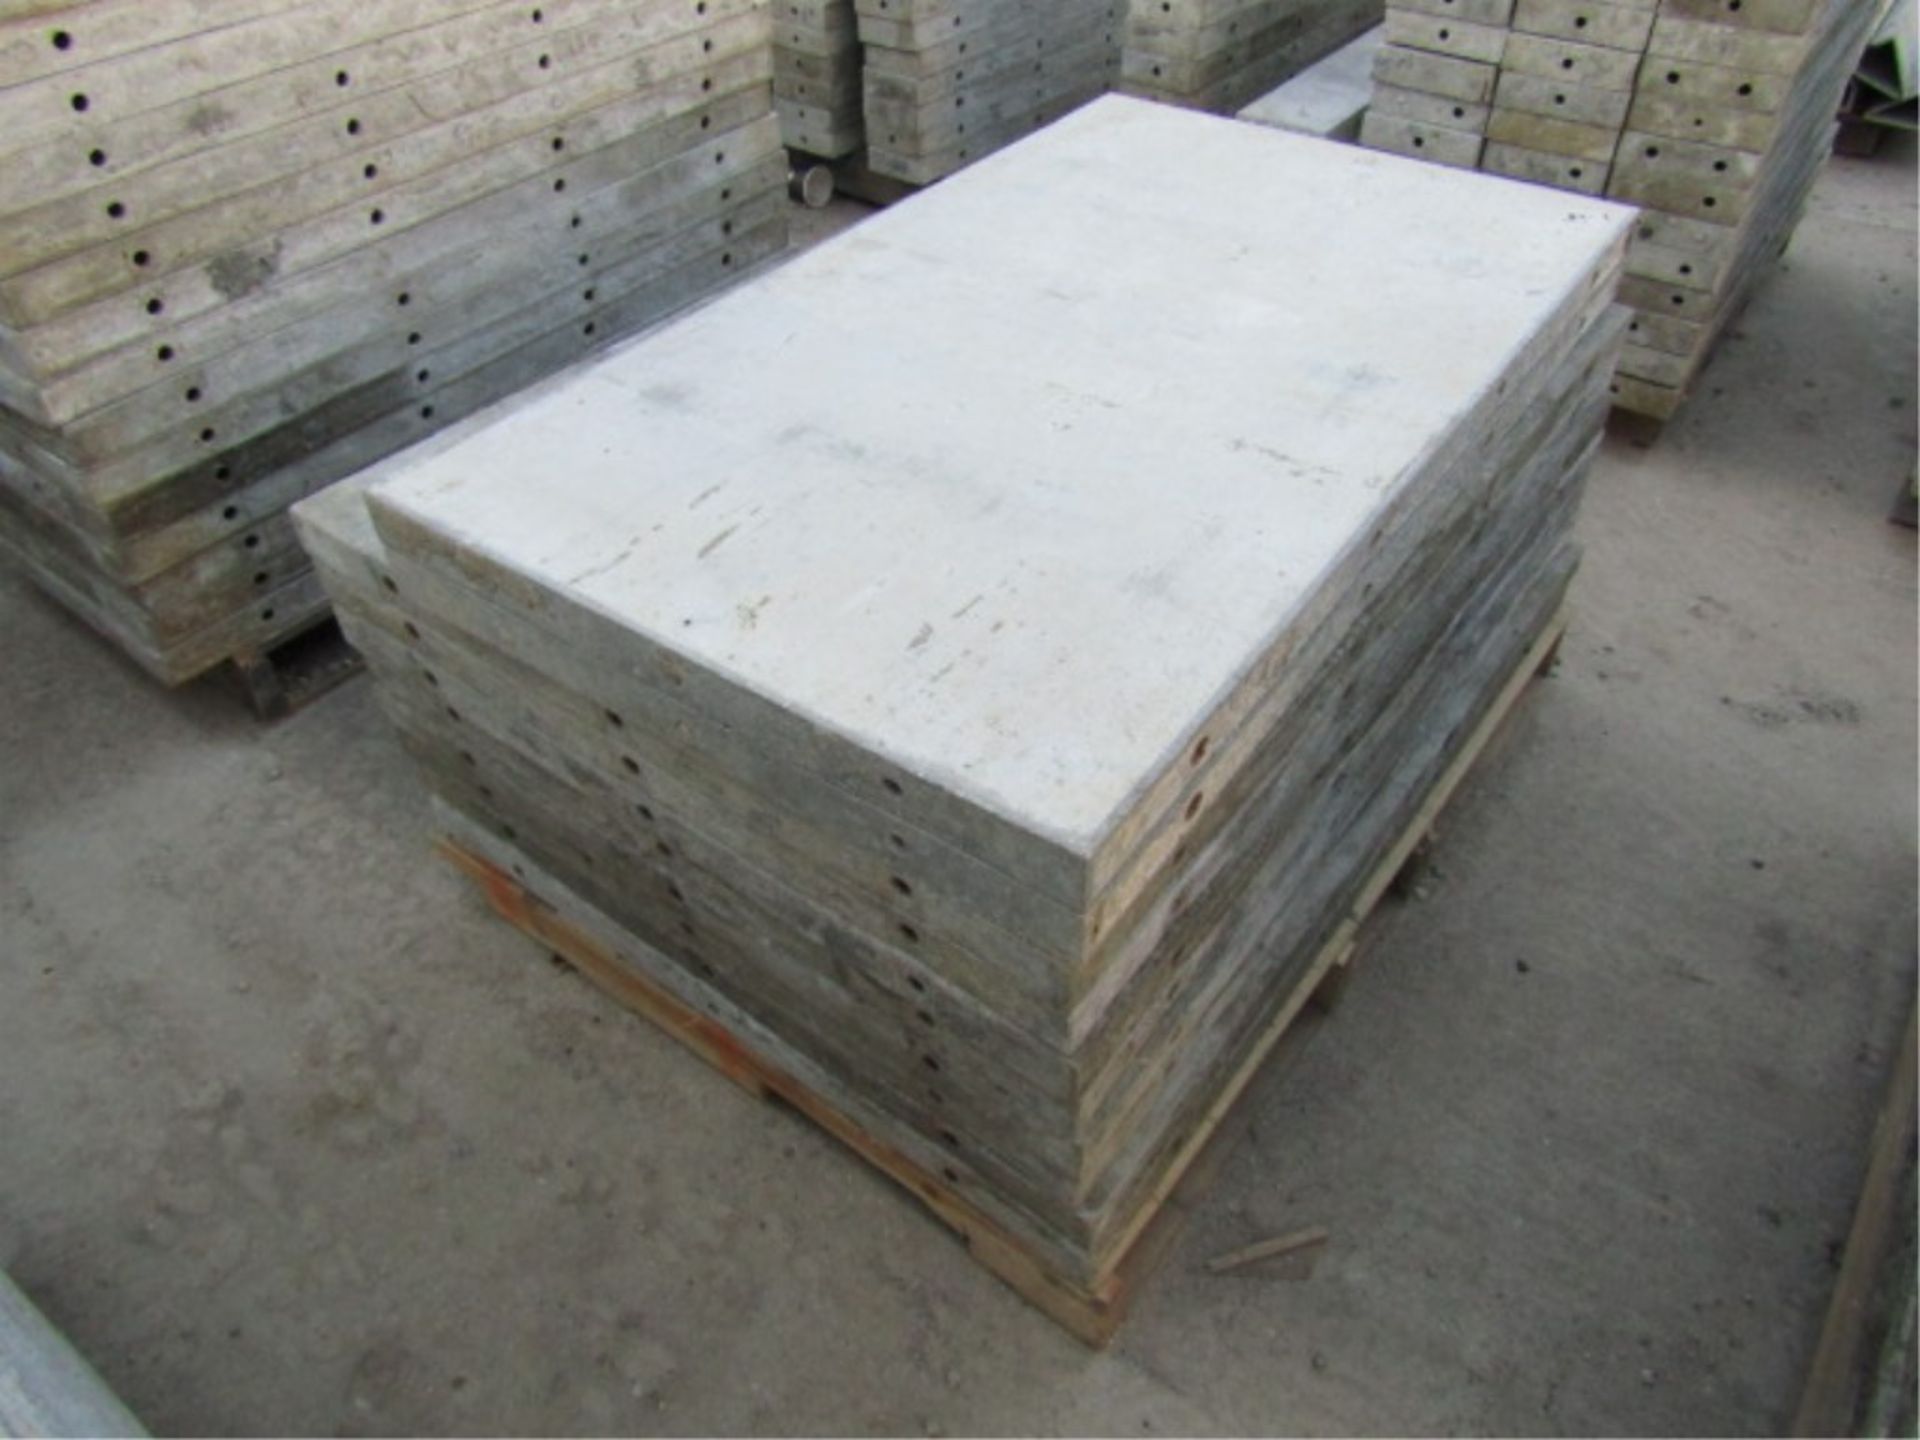 (8) 36" x 4' Western Laydown Concrete Forms, Smooth 6-12 Hole Pattern